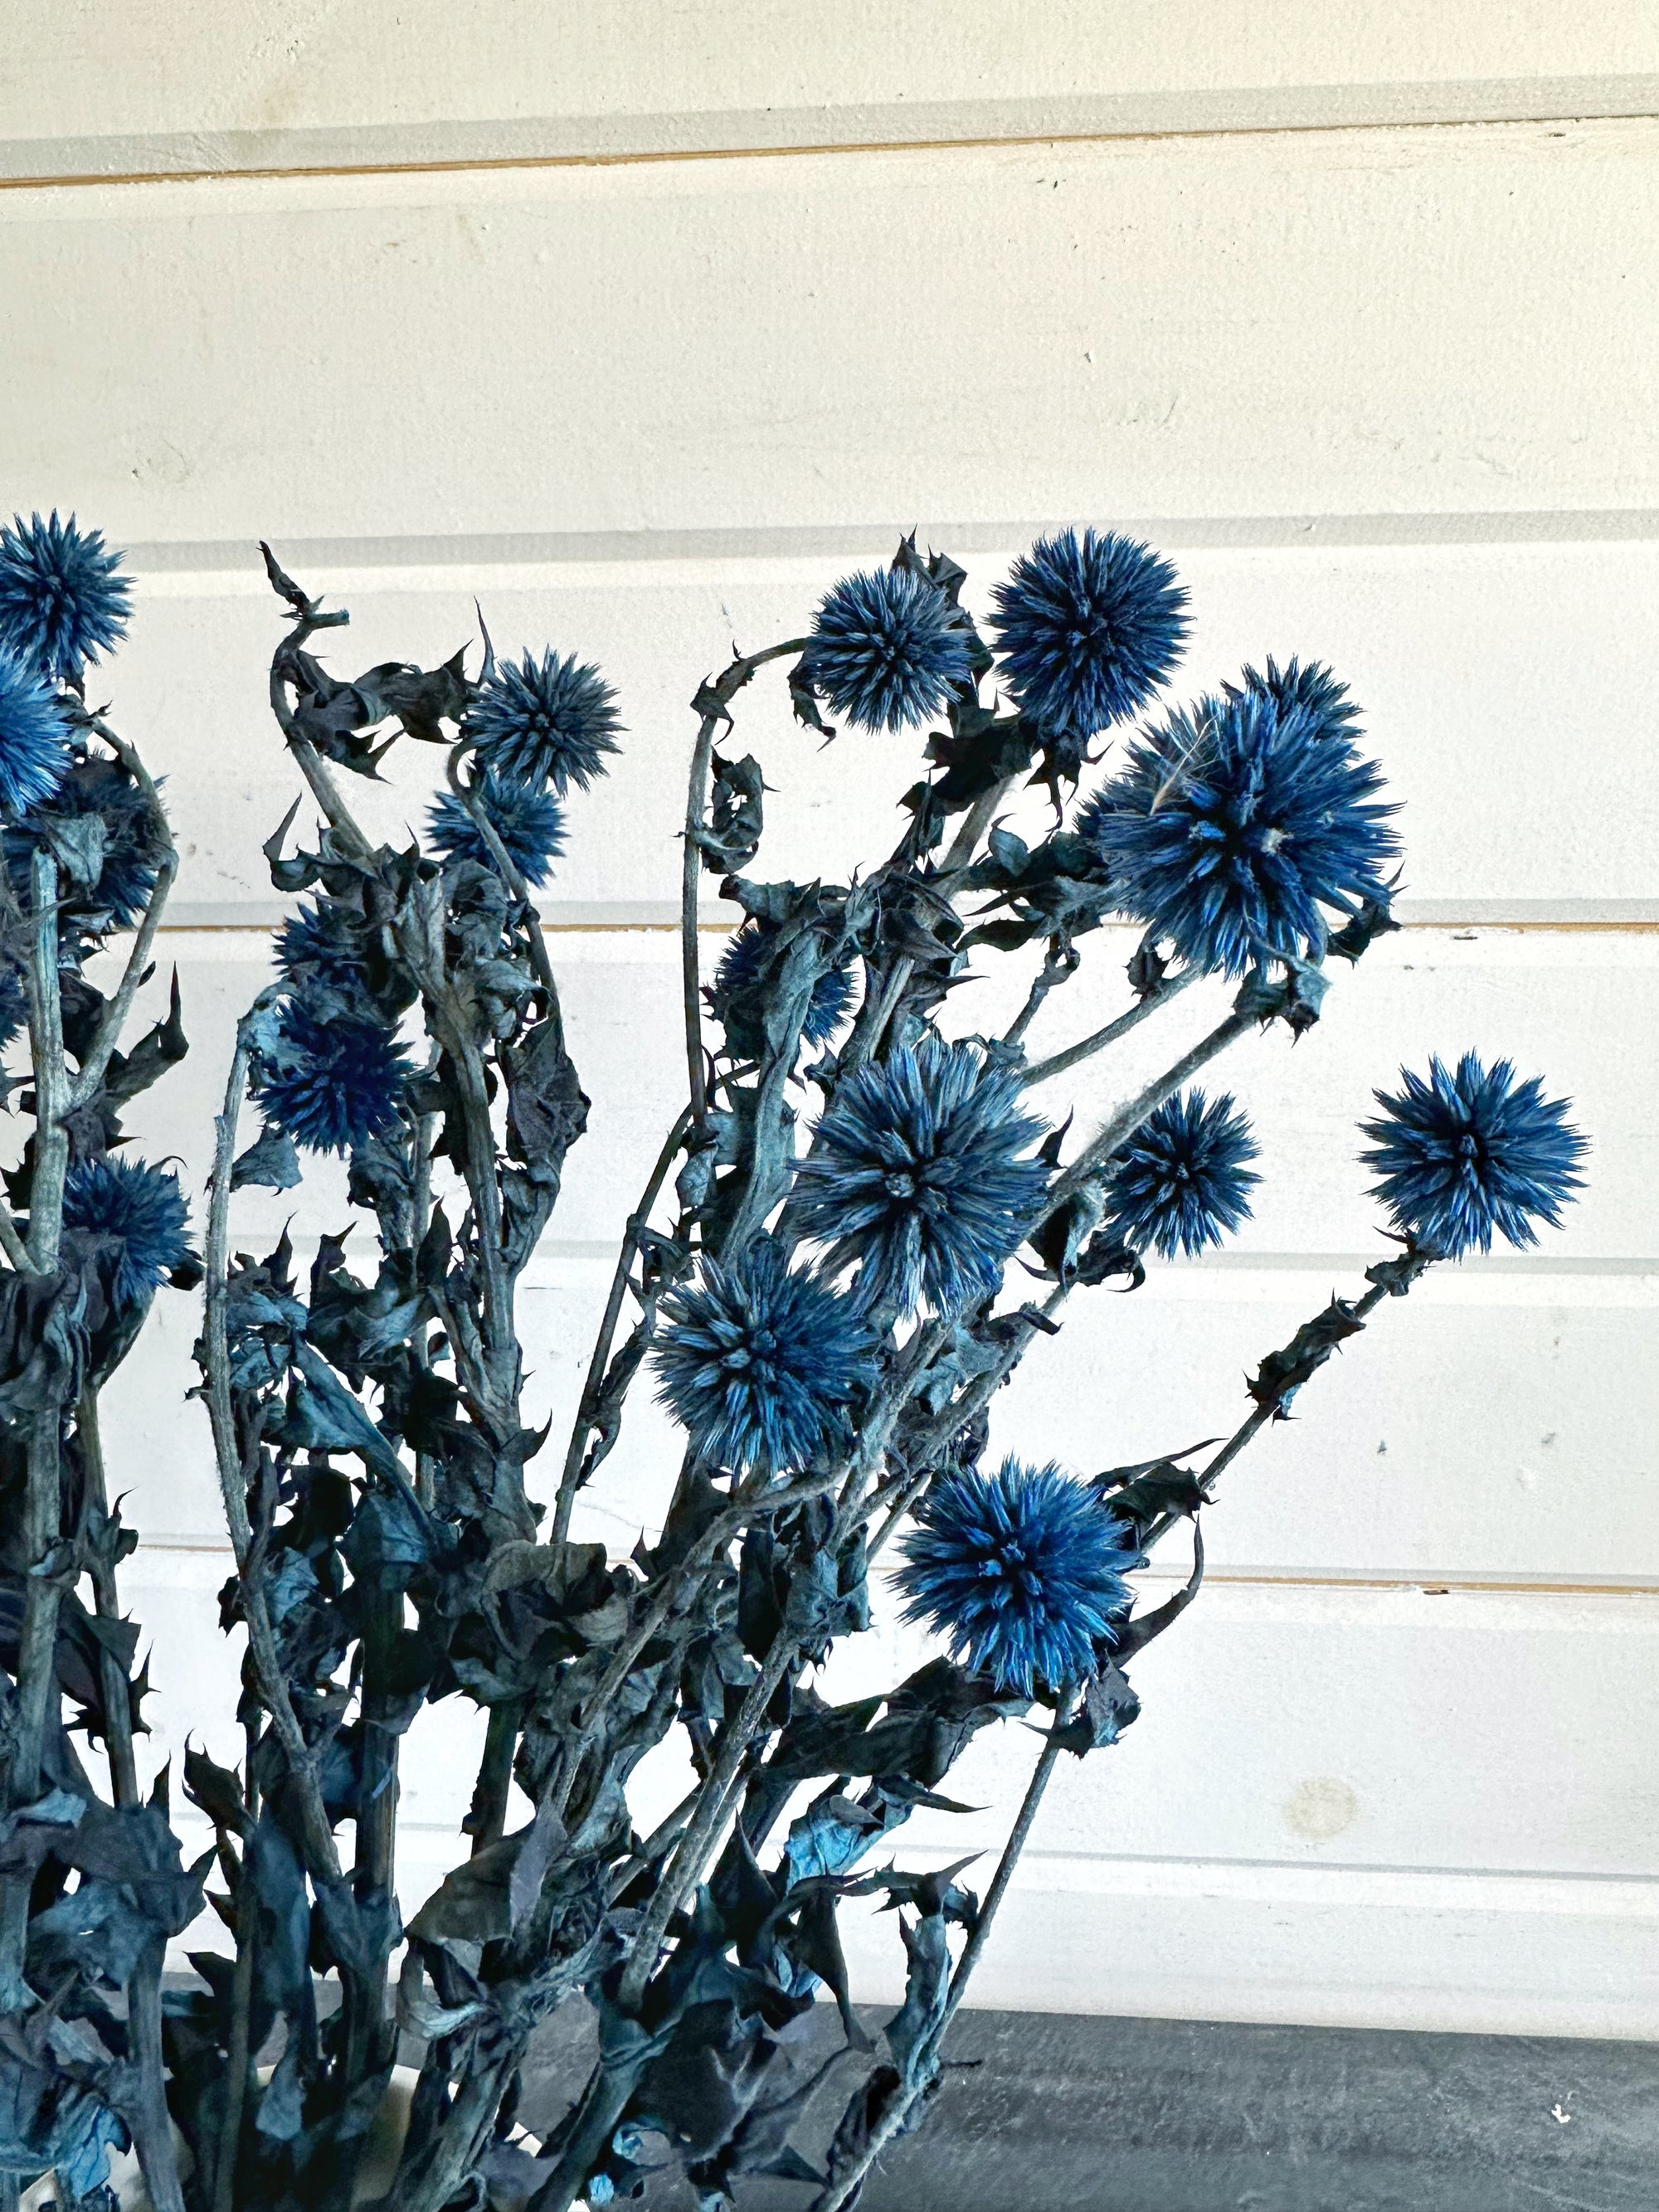 Blue Echinops  Dried and Dyed Filler - Oh! You're Lovely - Sola Wood  Flowers